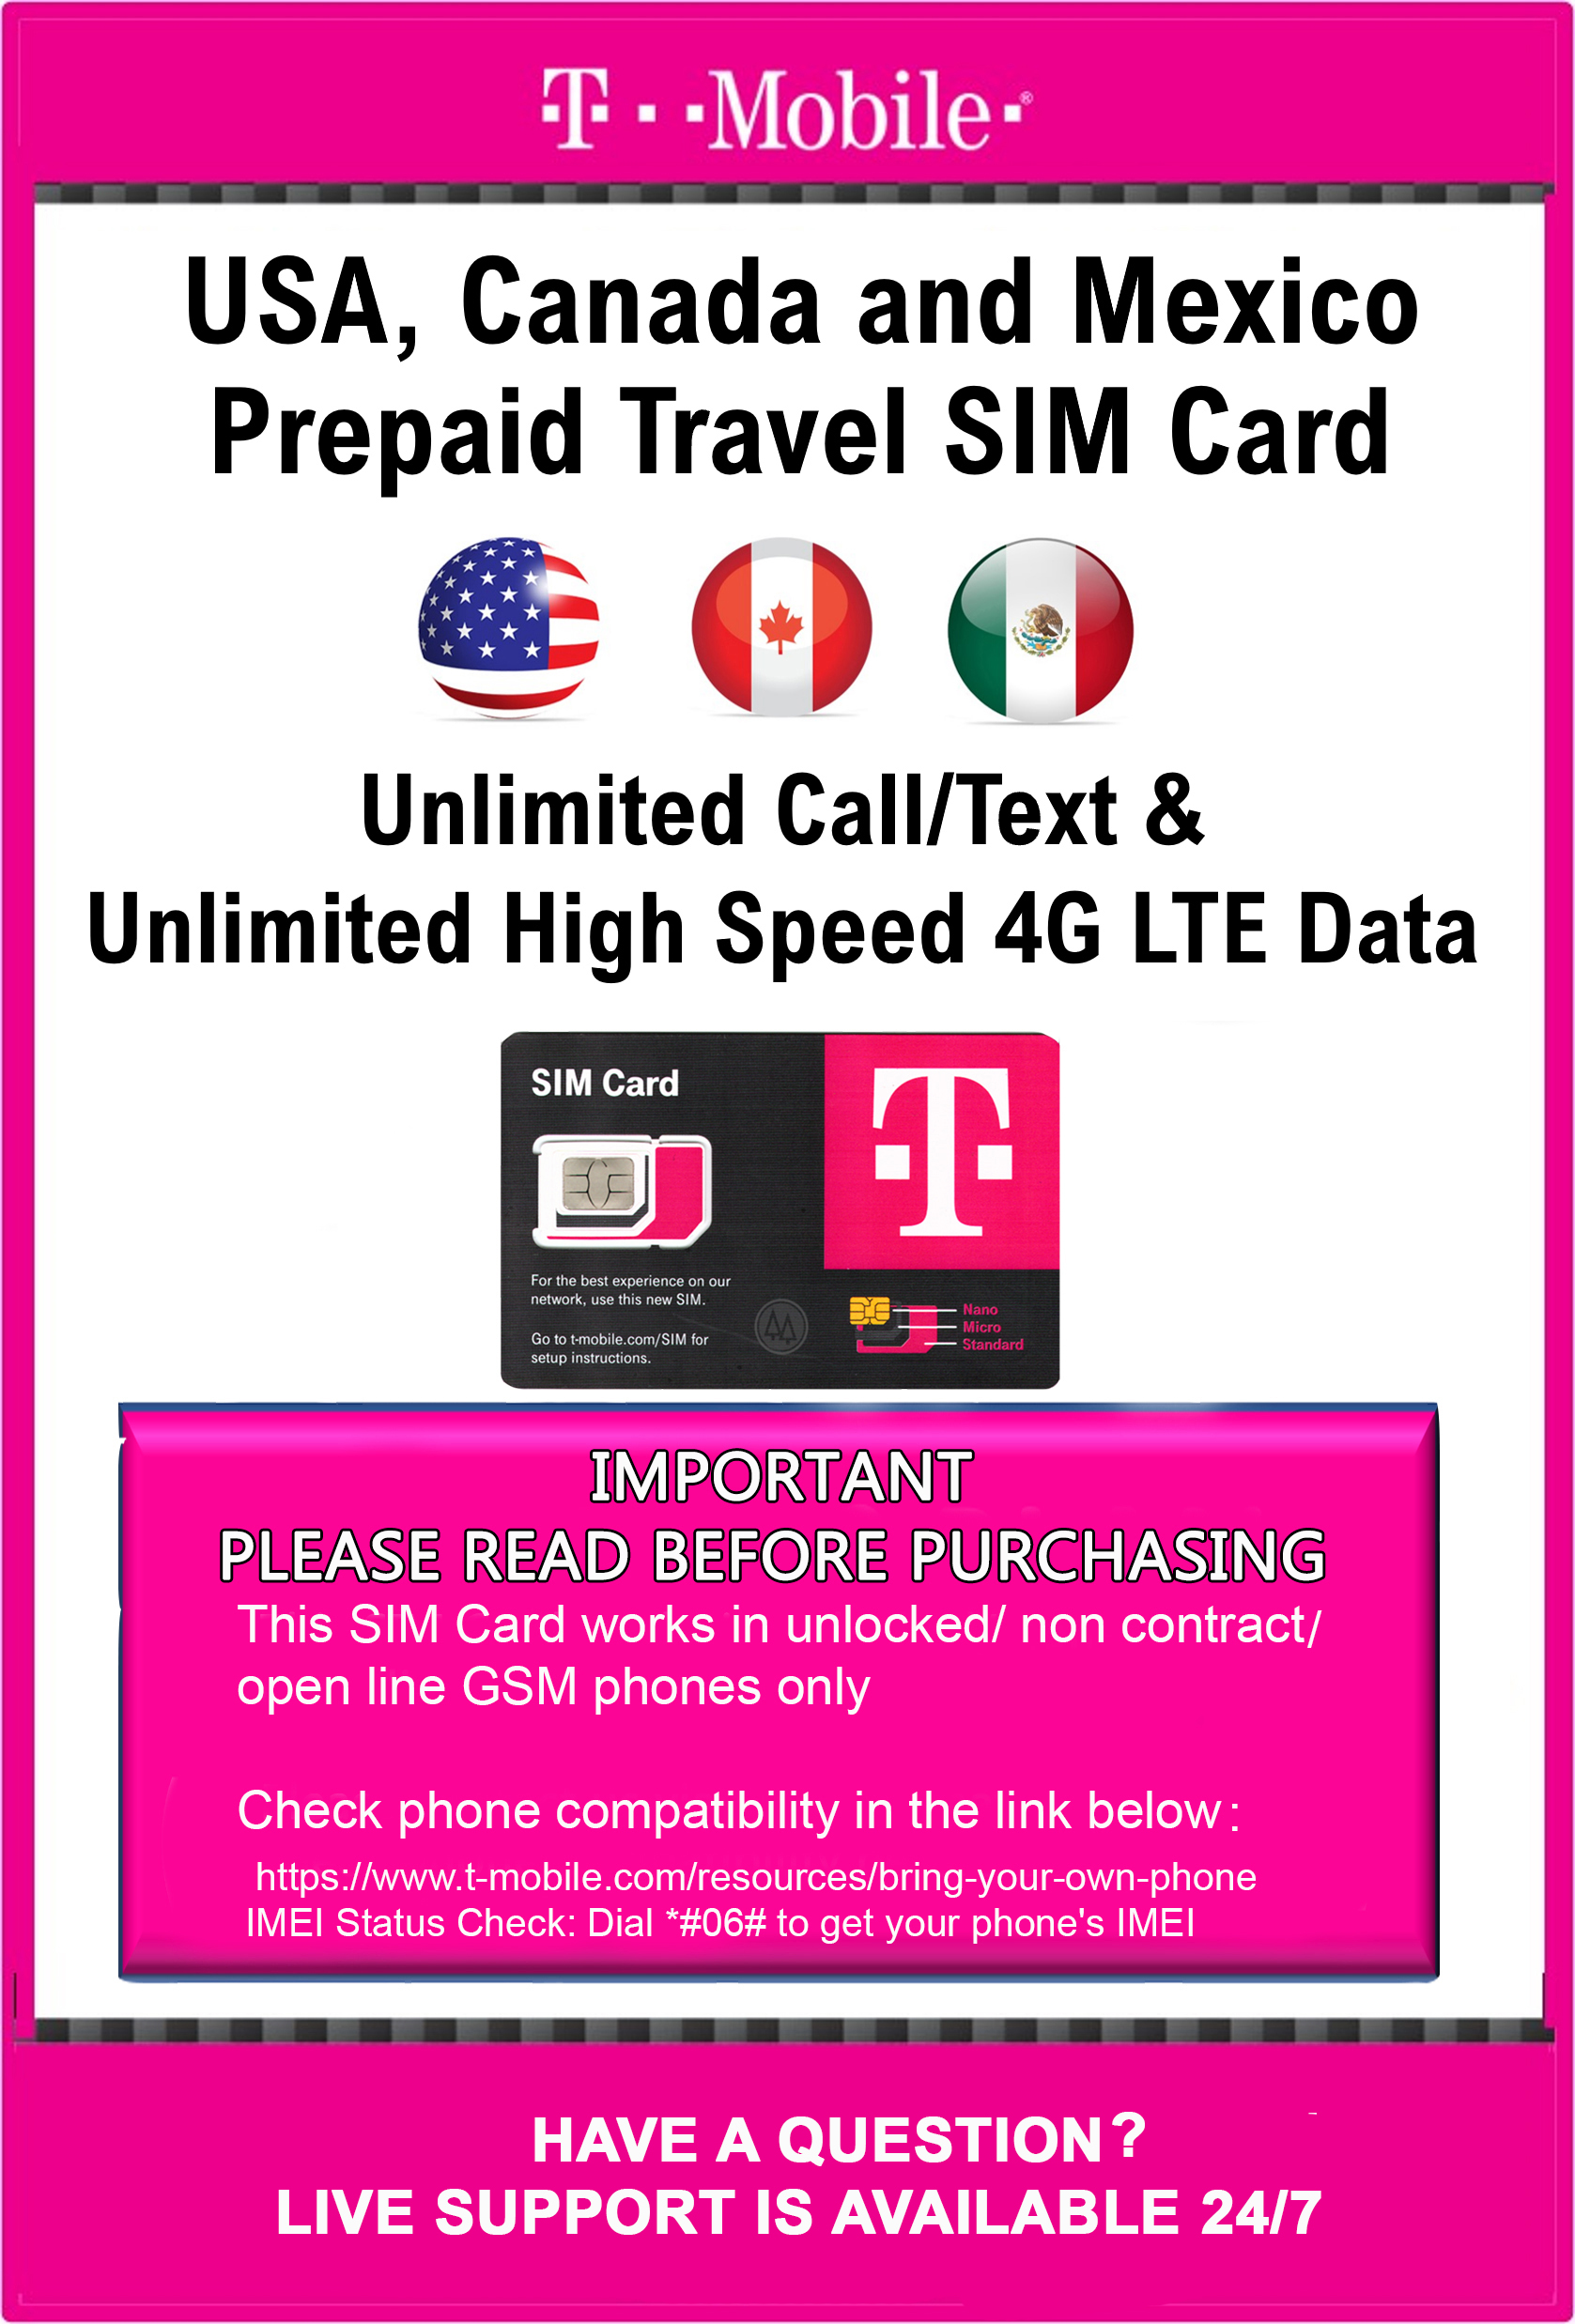 T-Mobile Brand USA Prepaid Travel SIM Card Unlimited Call, Text and 4G LTE  Data (for use in USA only) (for Phone use only. NOT for Modem/WiFi Devices)